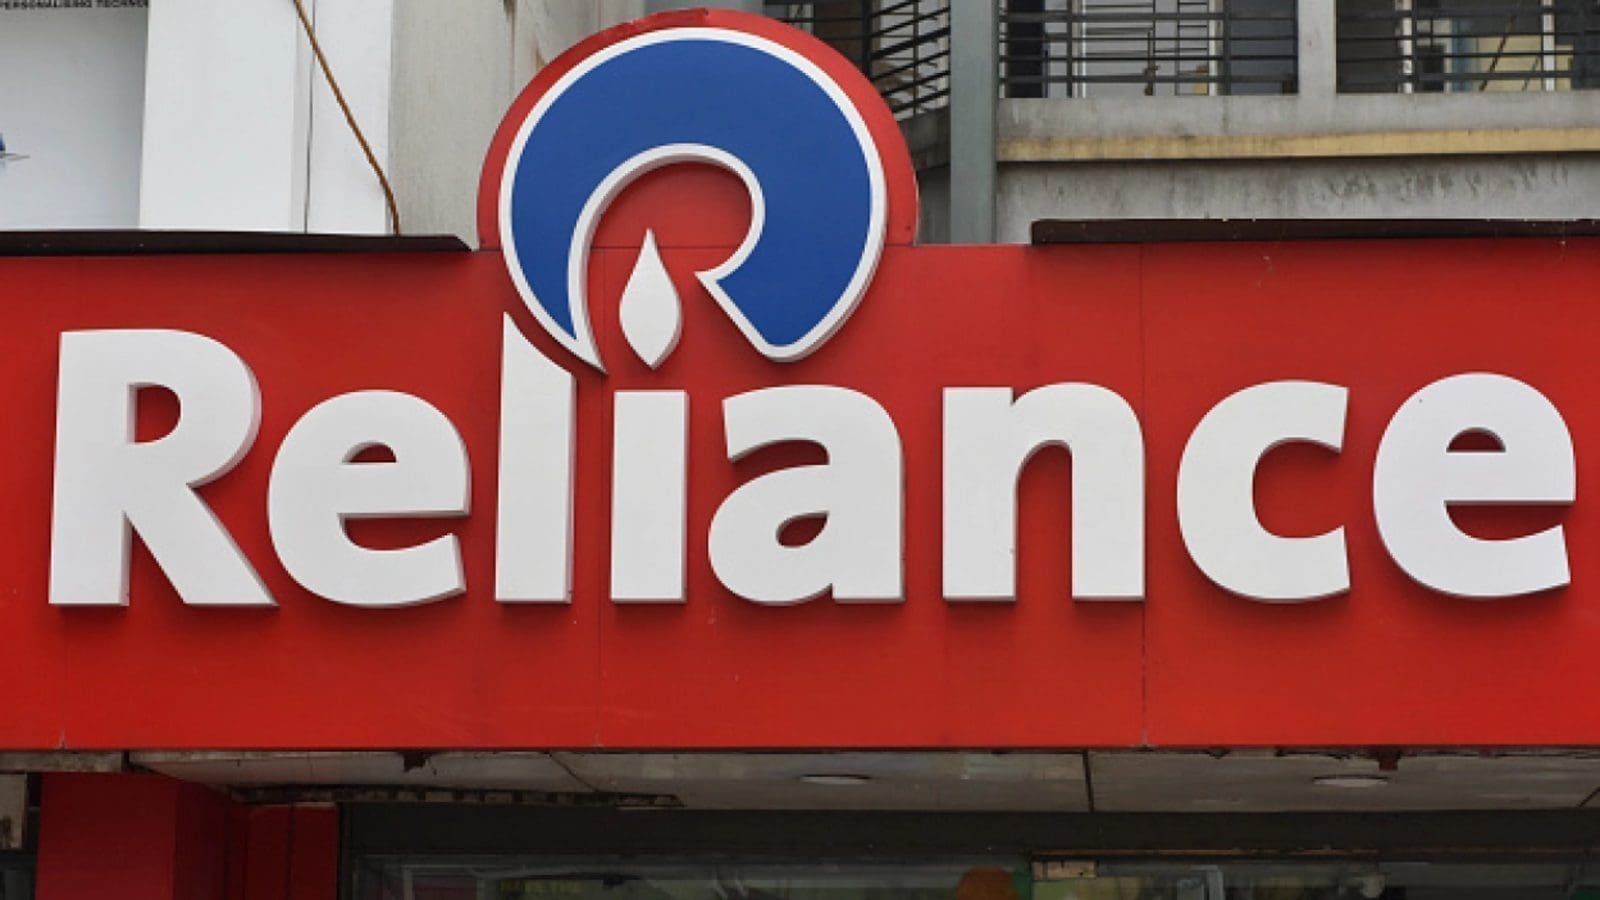 Reliance eyes growth in fast-moving consumer goods segment through brand acquisitions